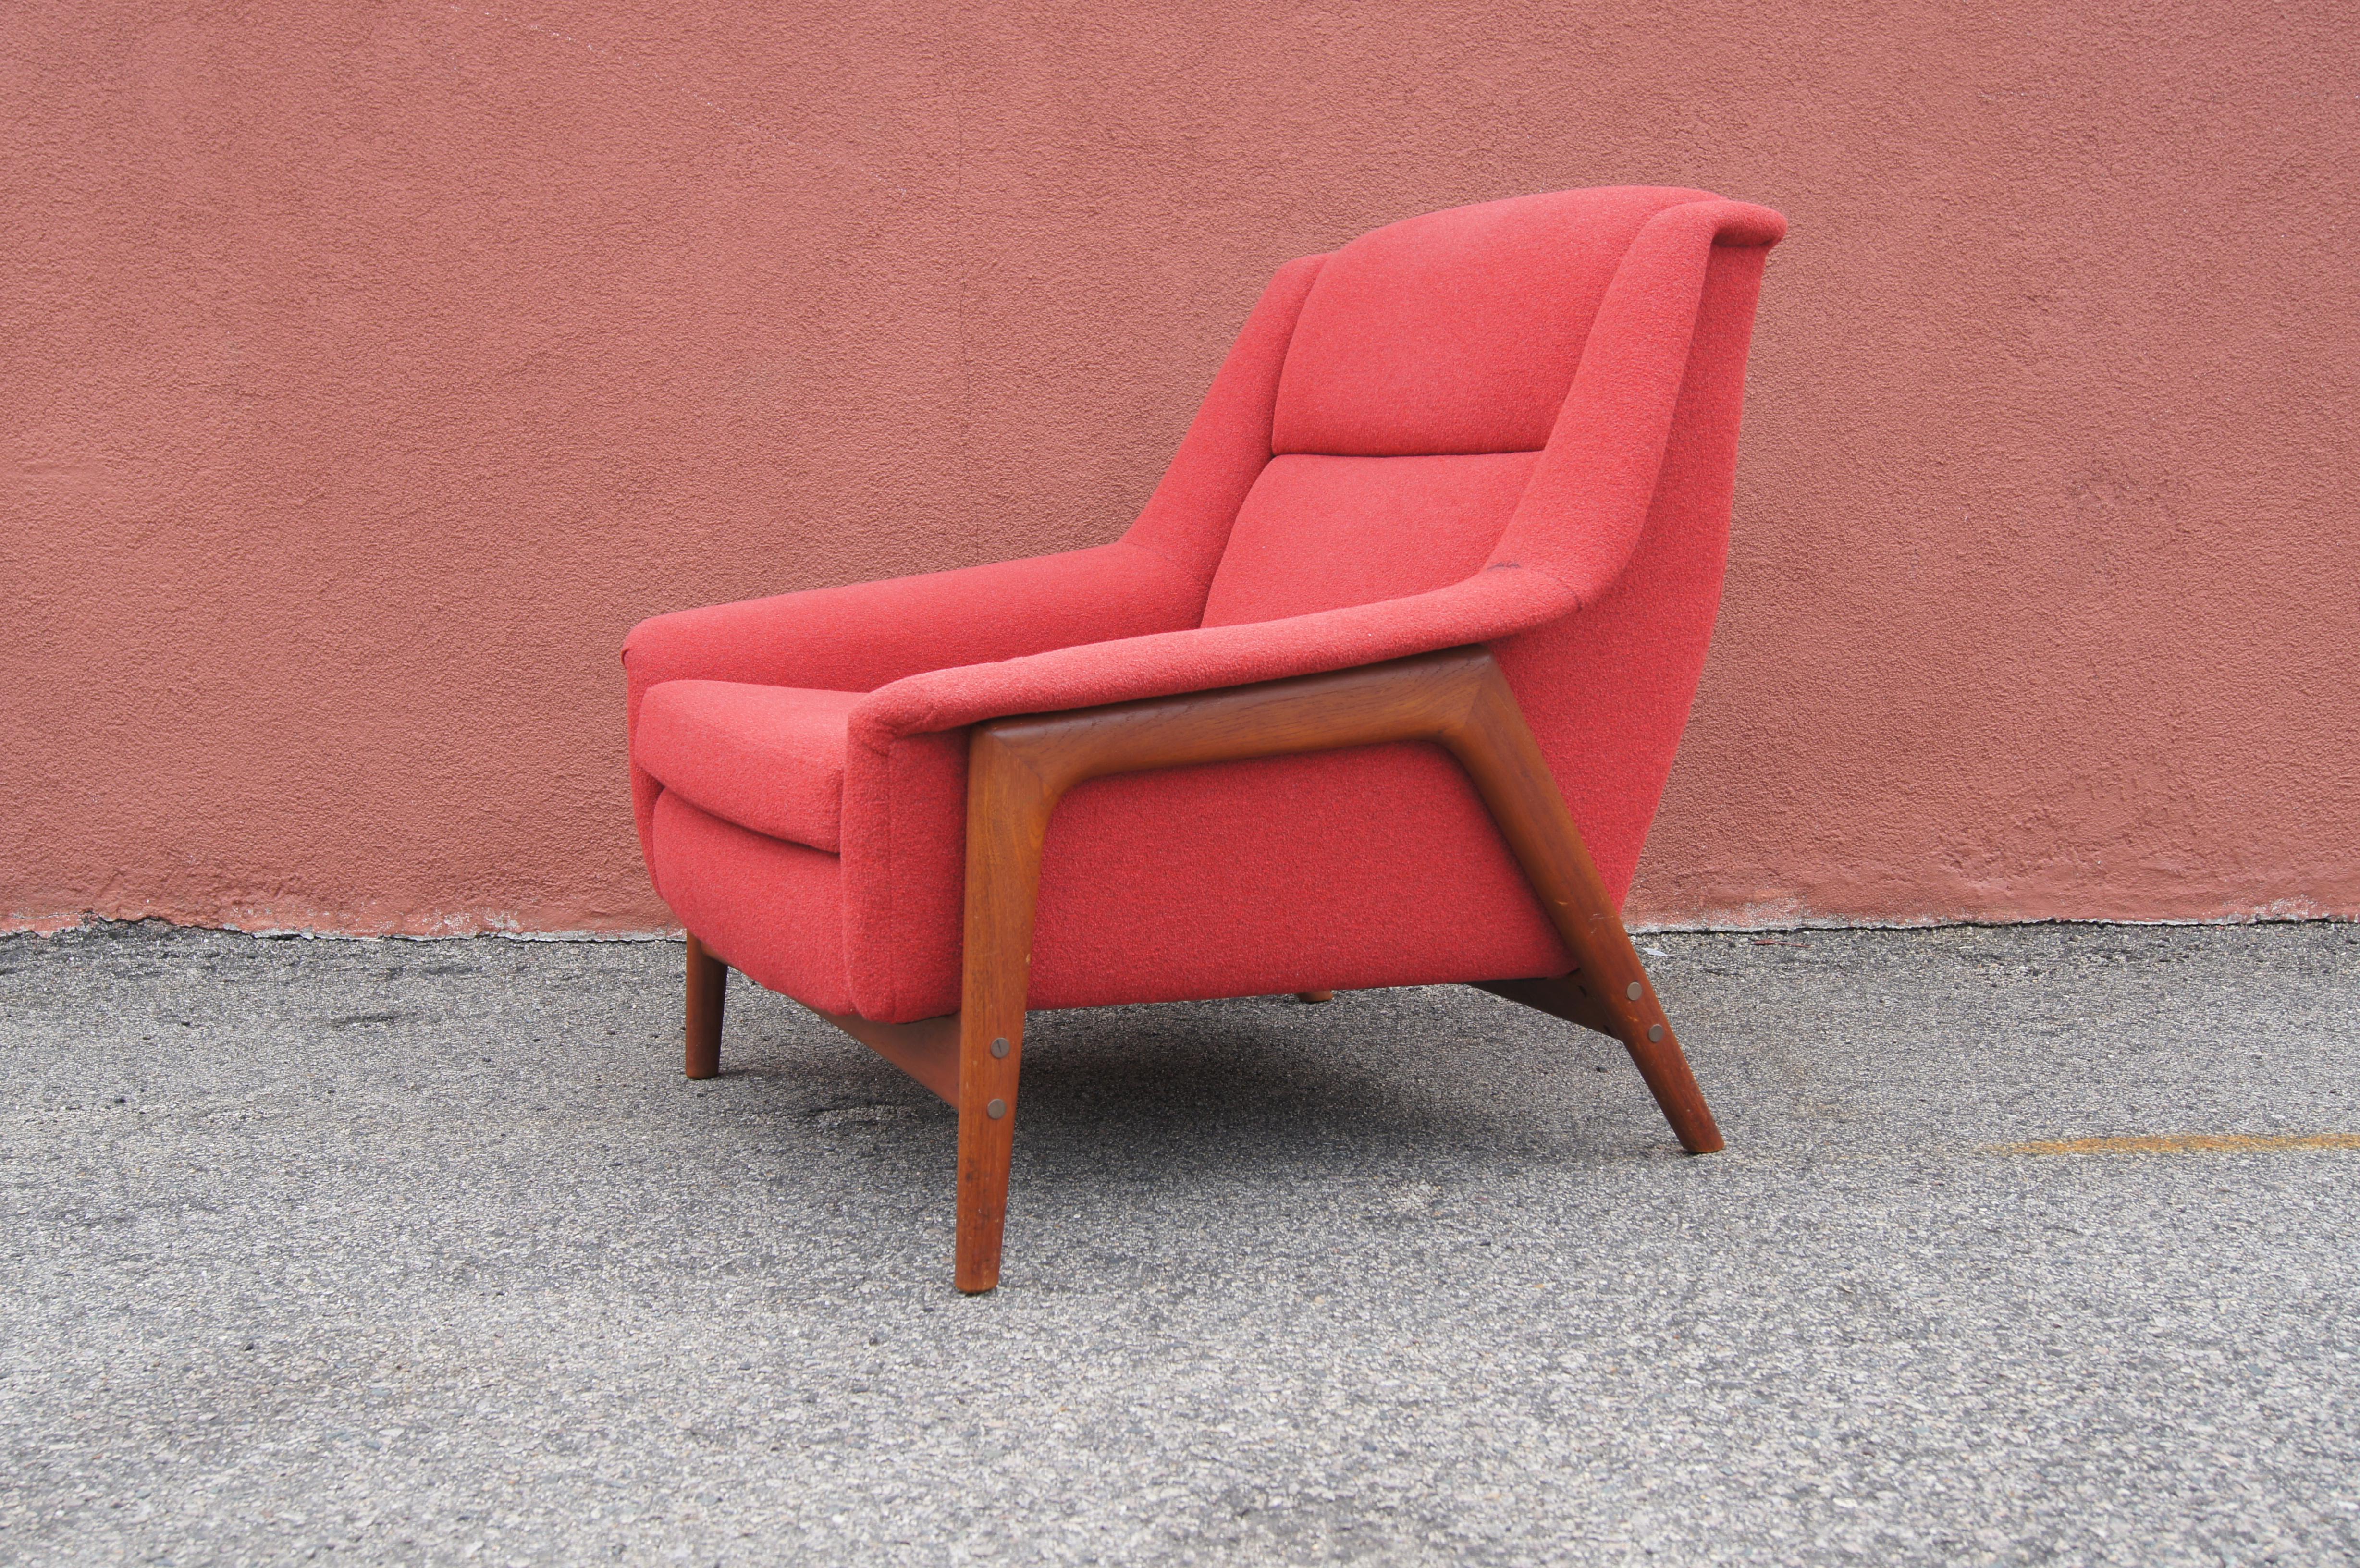 Designed by Folke Ohlsson and manufactured by Dux, this Scandinavian Modern lounge chair features an exposed teak frame and a very comfortable deep seat with wide armrests.

At one point reupholstered in Knoll's Cuddlecloth in Torch, it should be